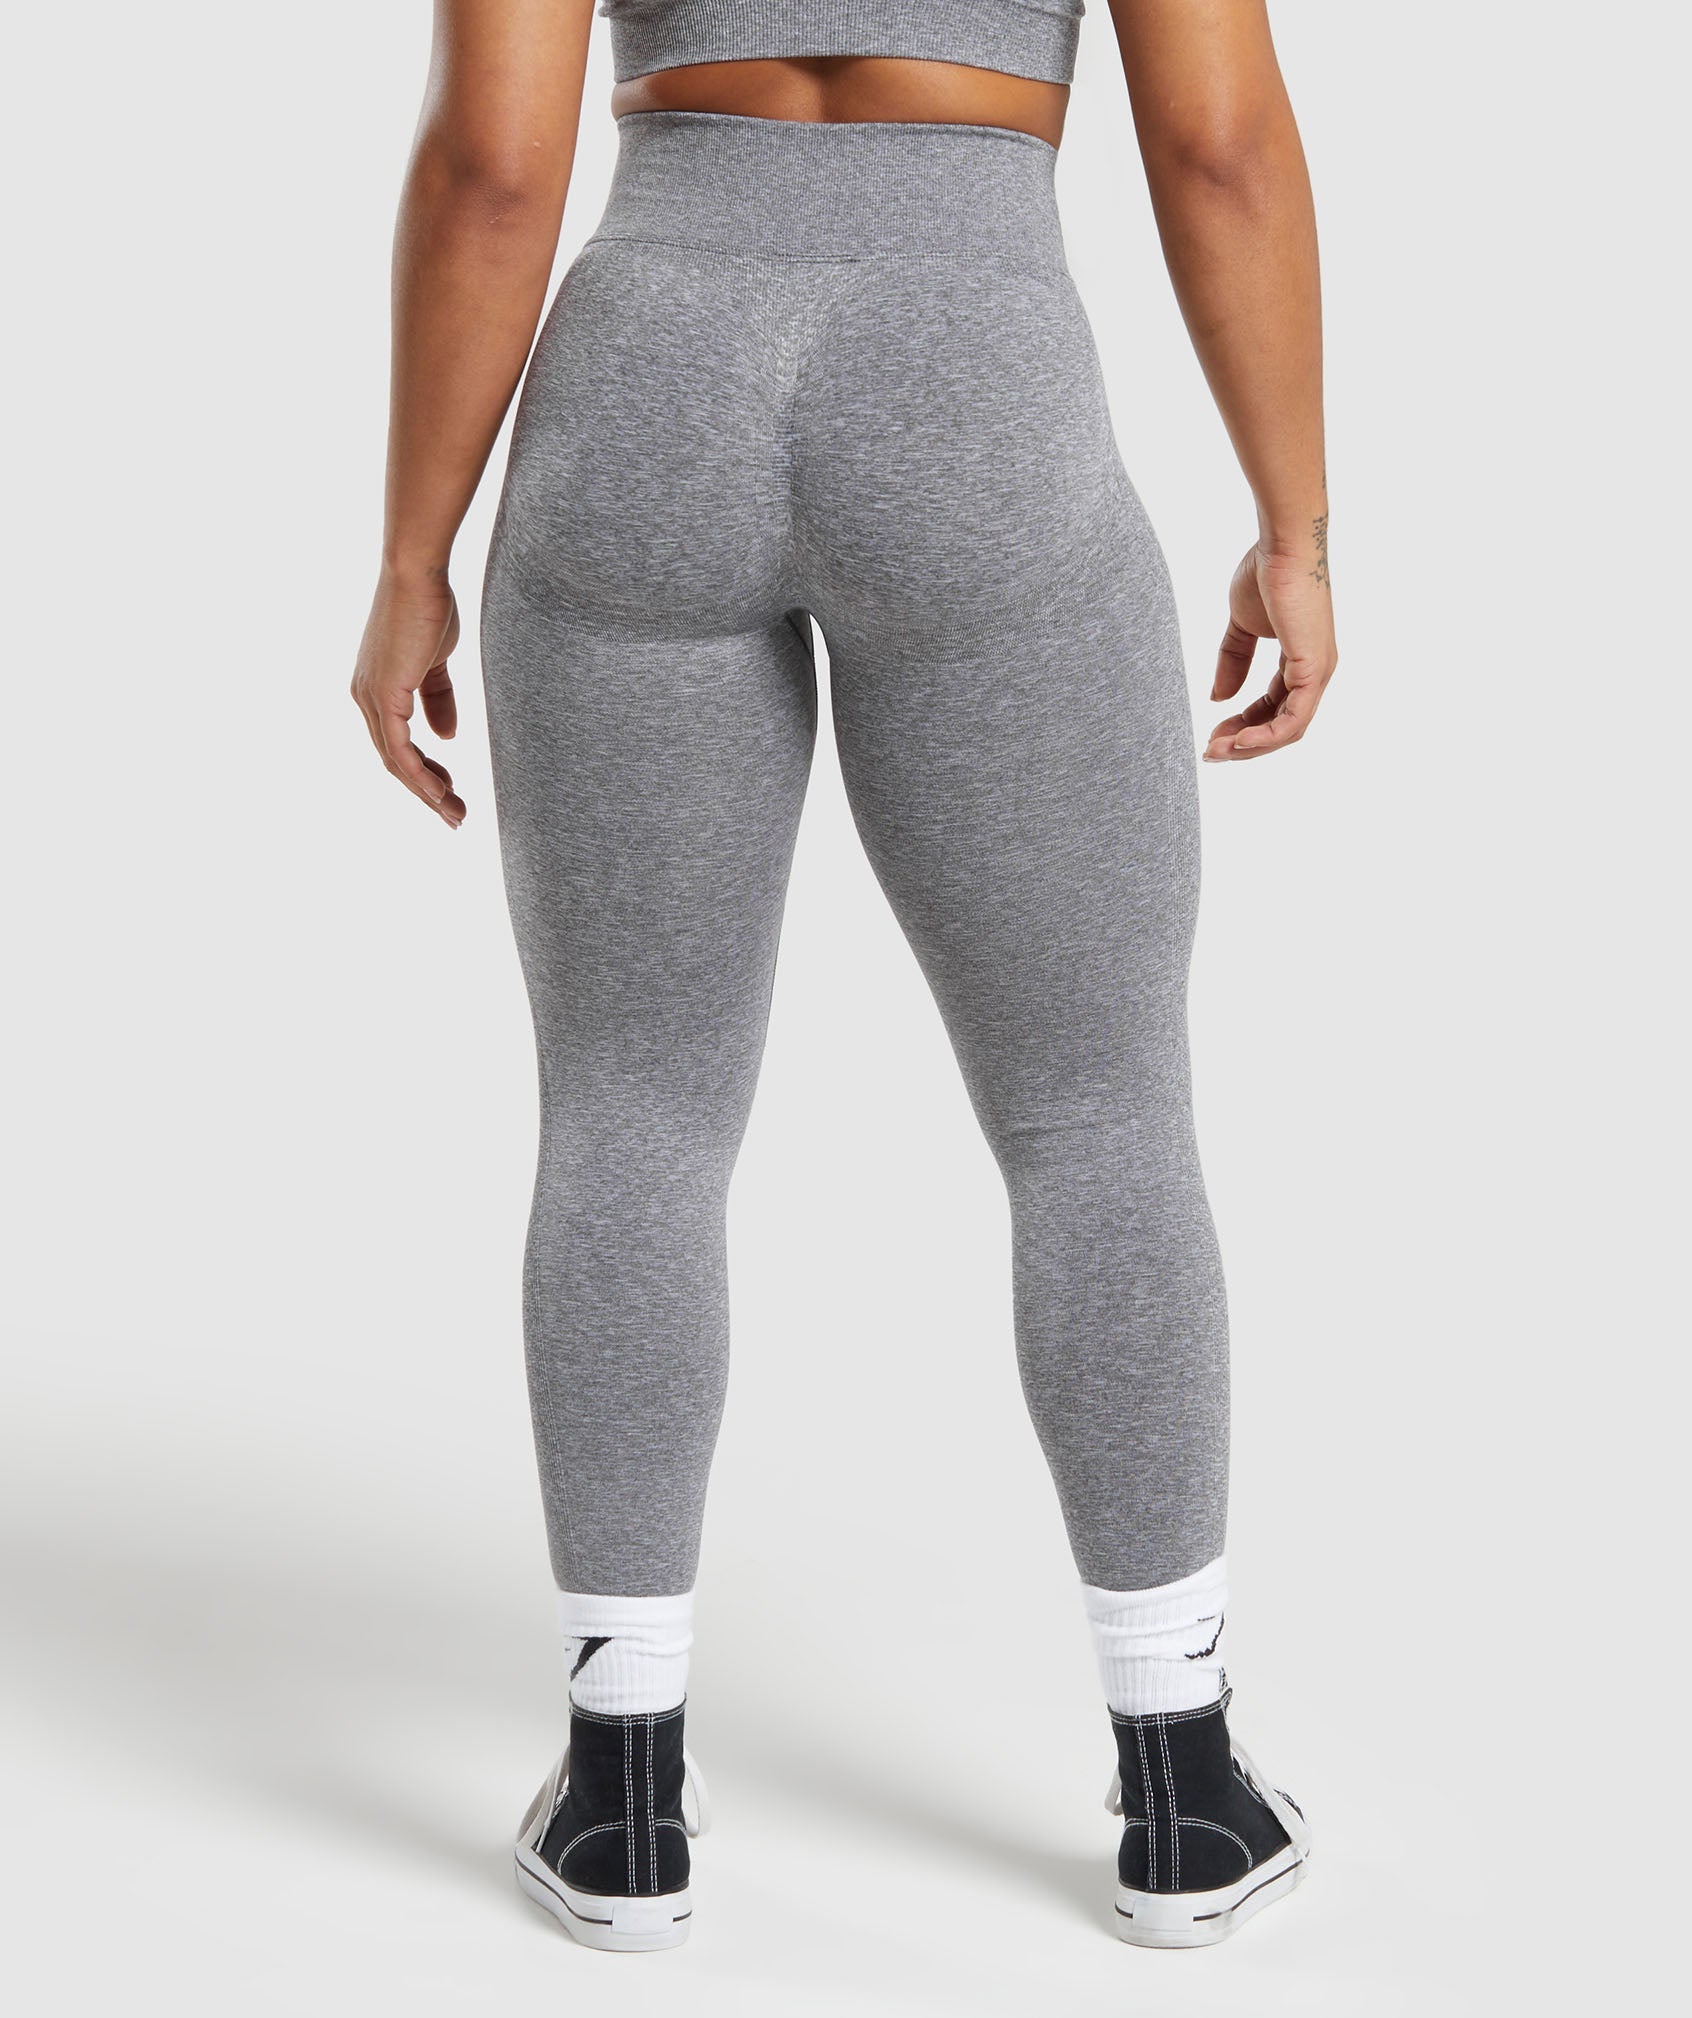 Lift Contour Seamless Leggings in Brushed Grey/White Marl - view 2